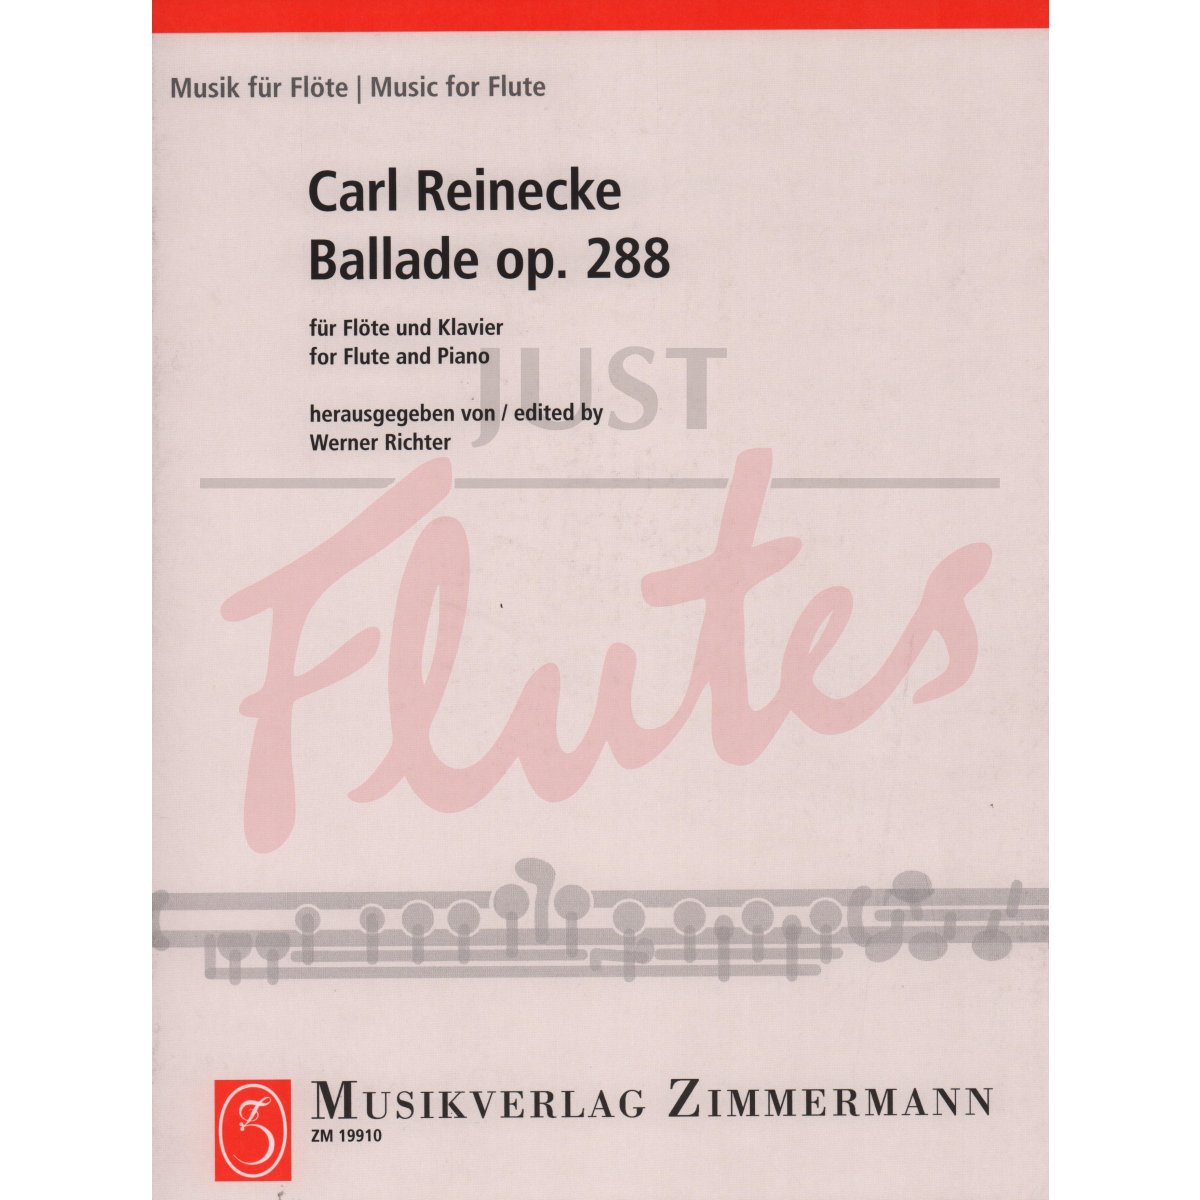 Ballade for Flute and Piano